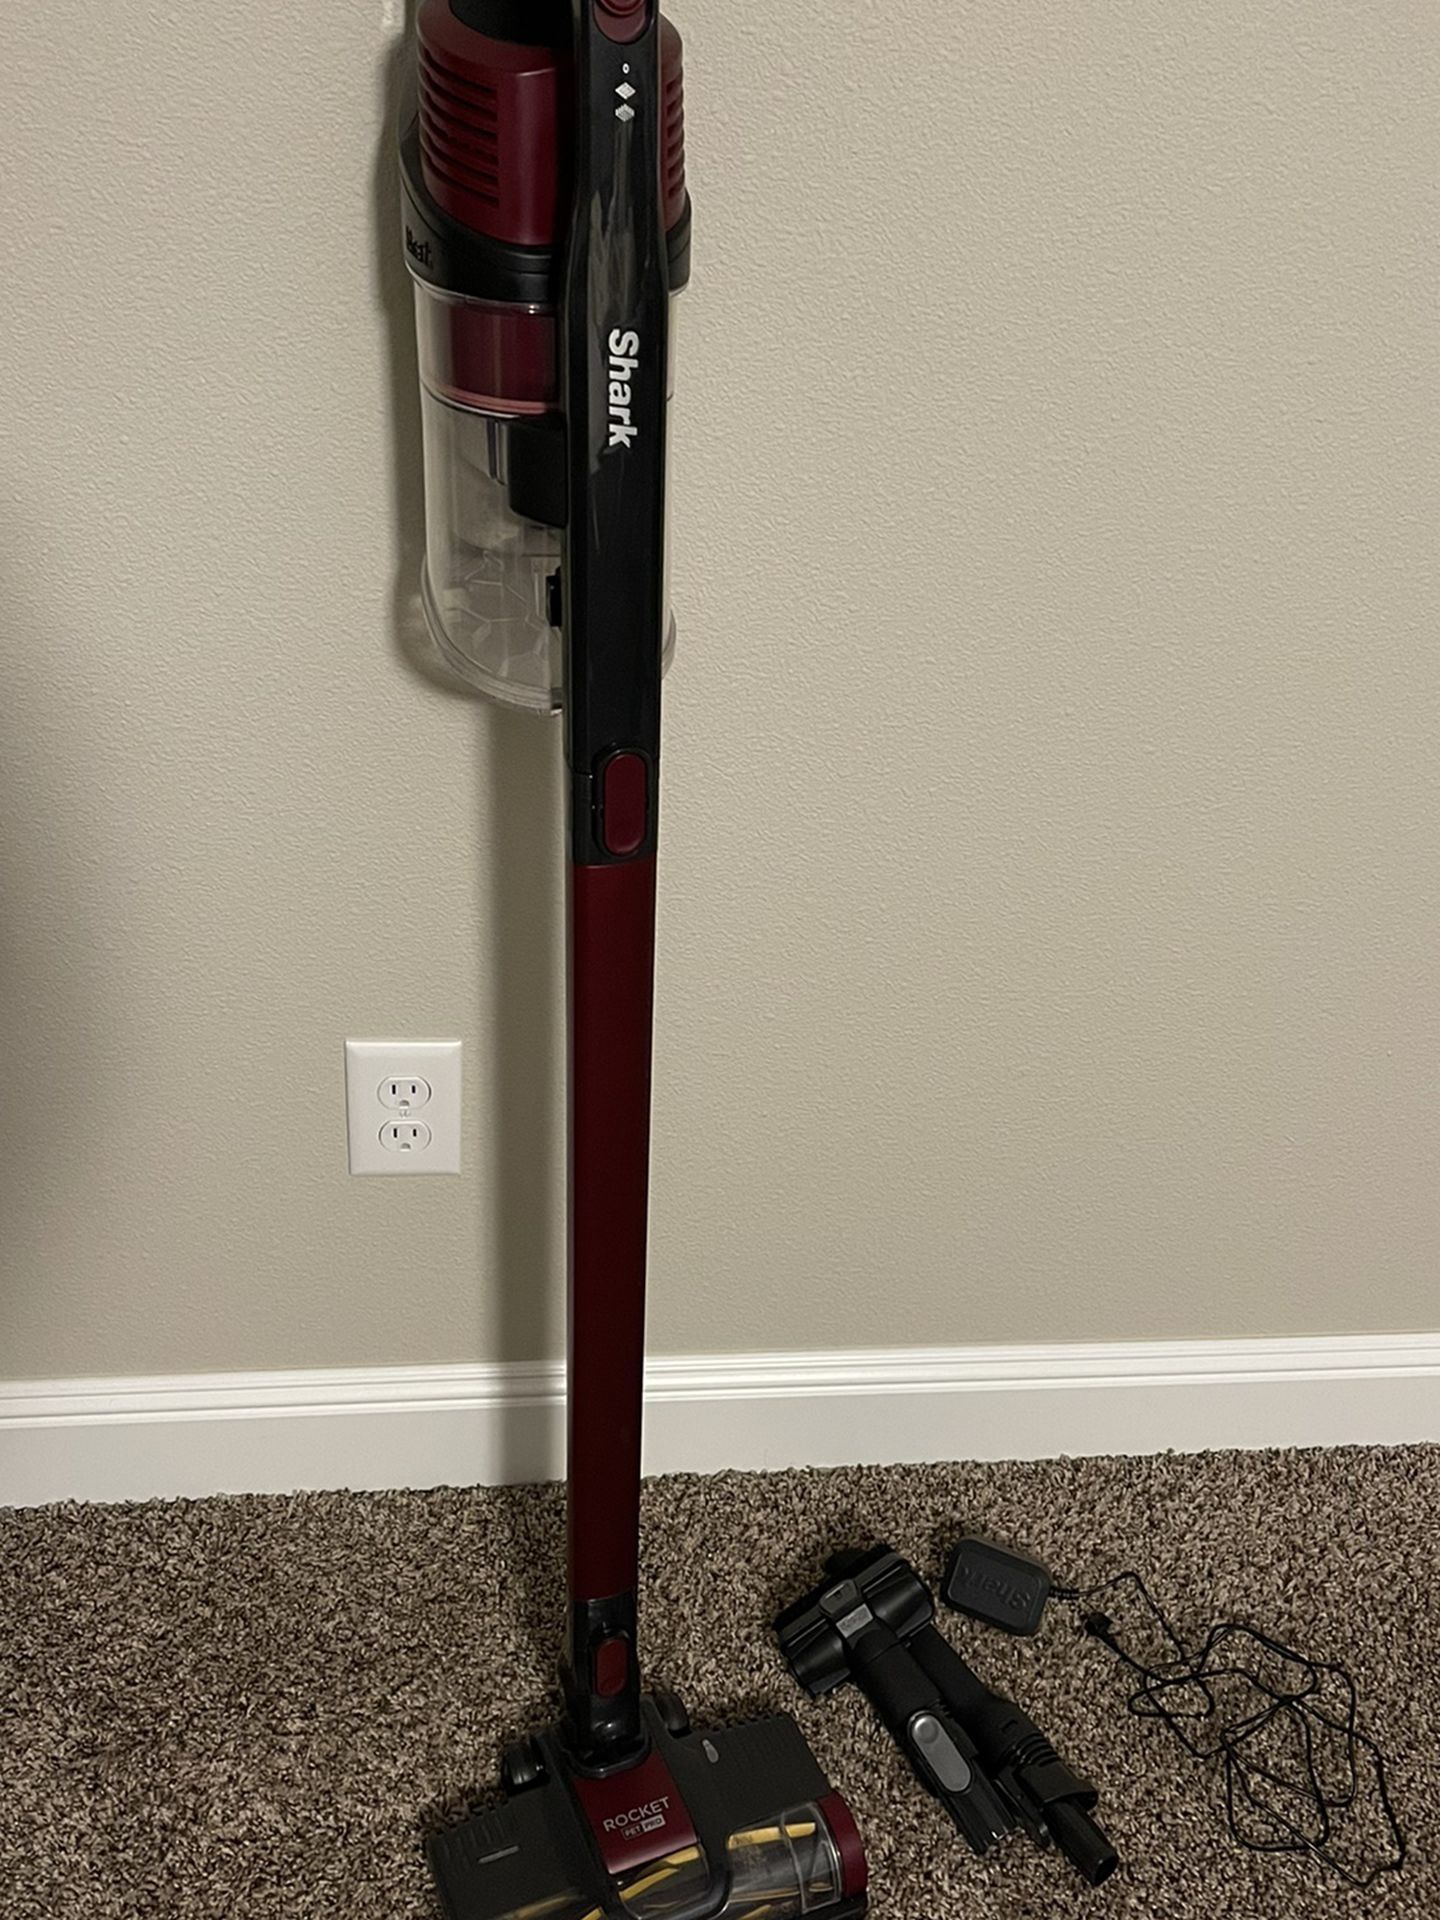 Brand new Cordless Shark vacuum (Best Offer Accepted)